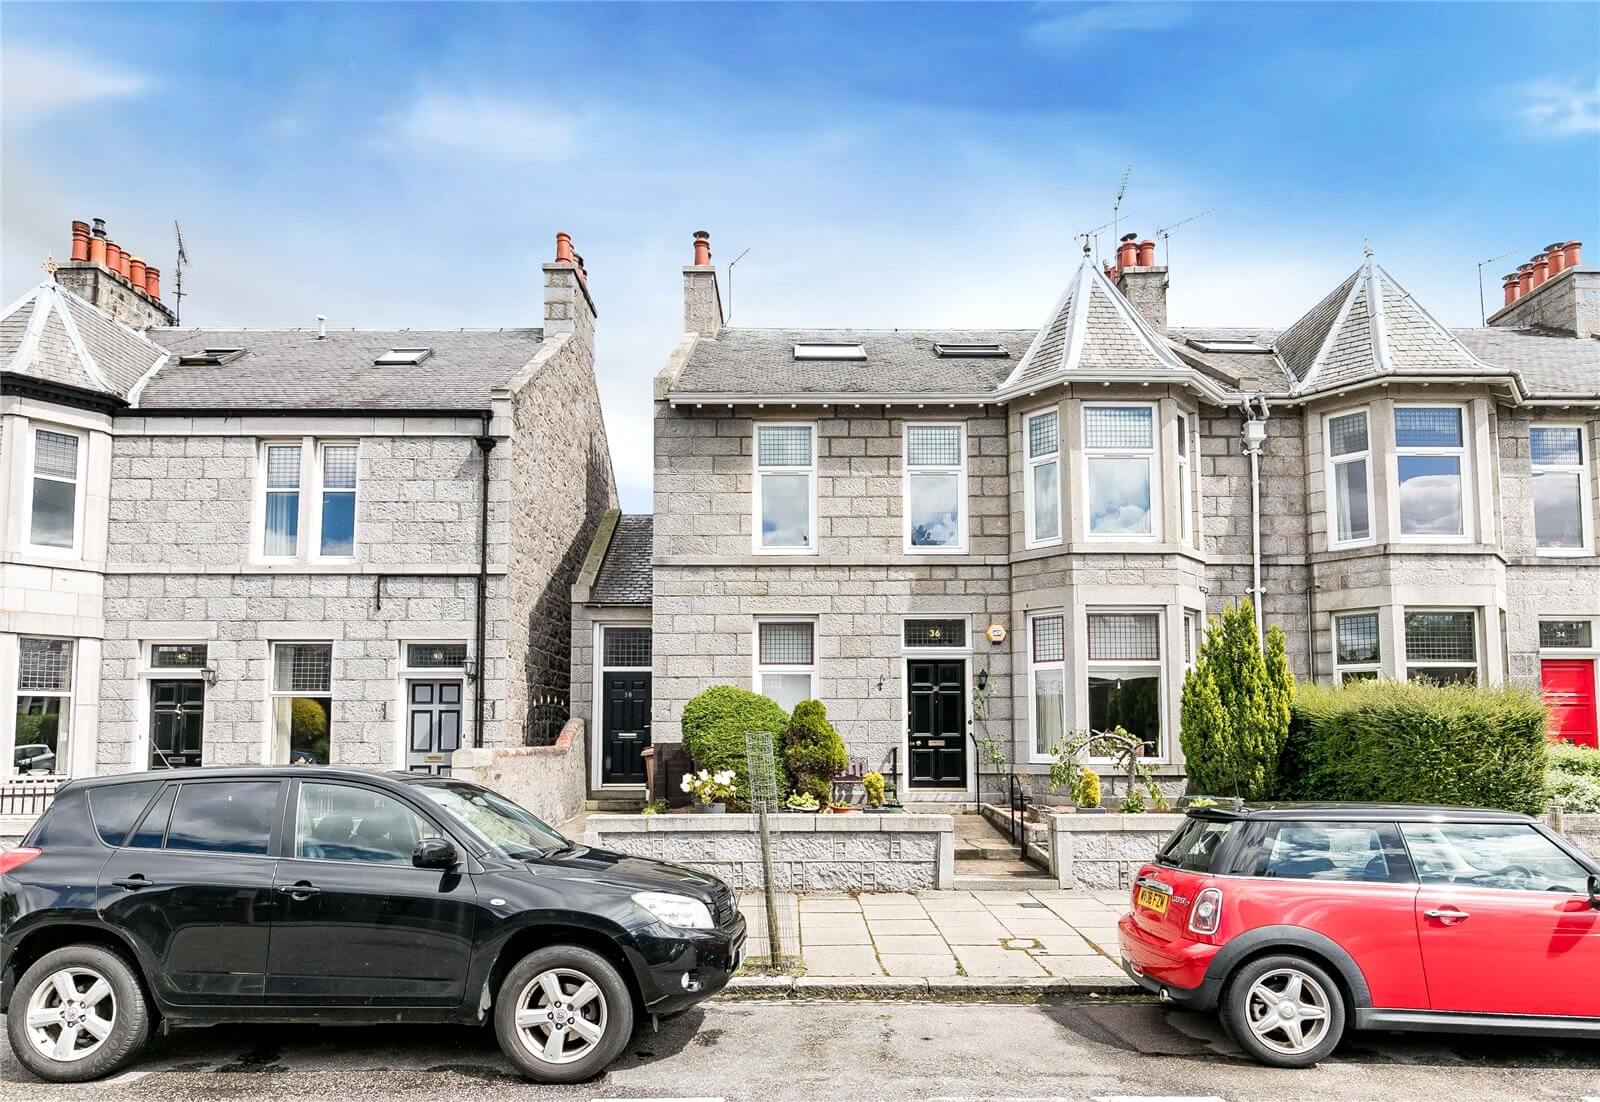 Our latest properties for sale and to let (4th July 2019)